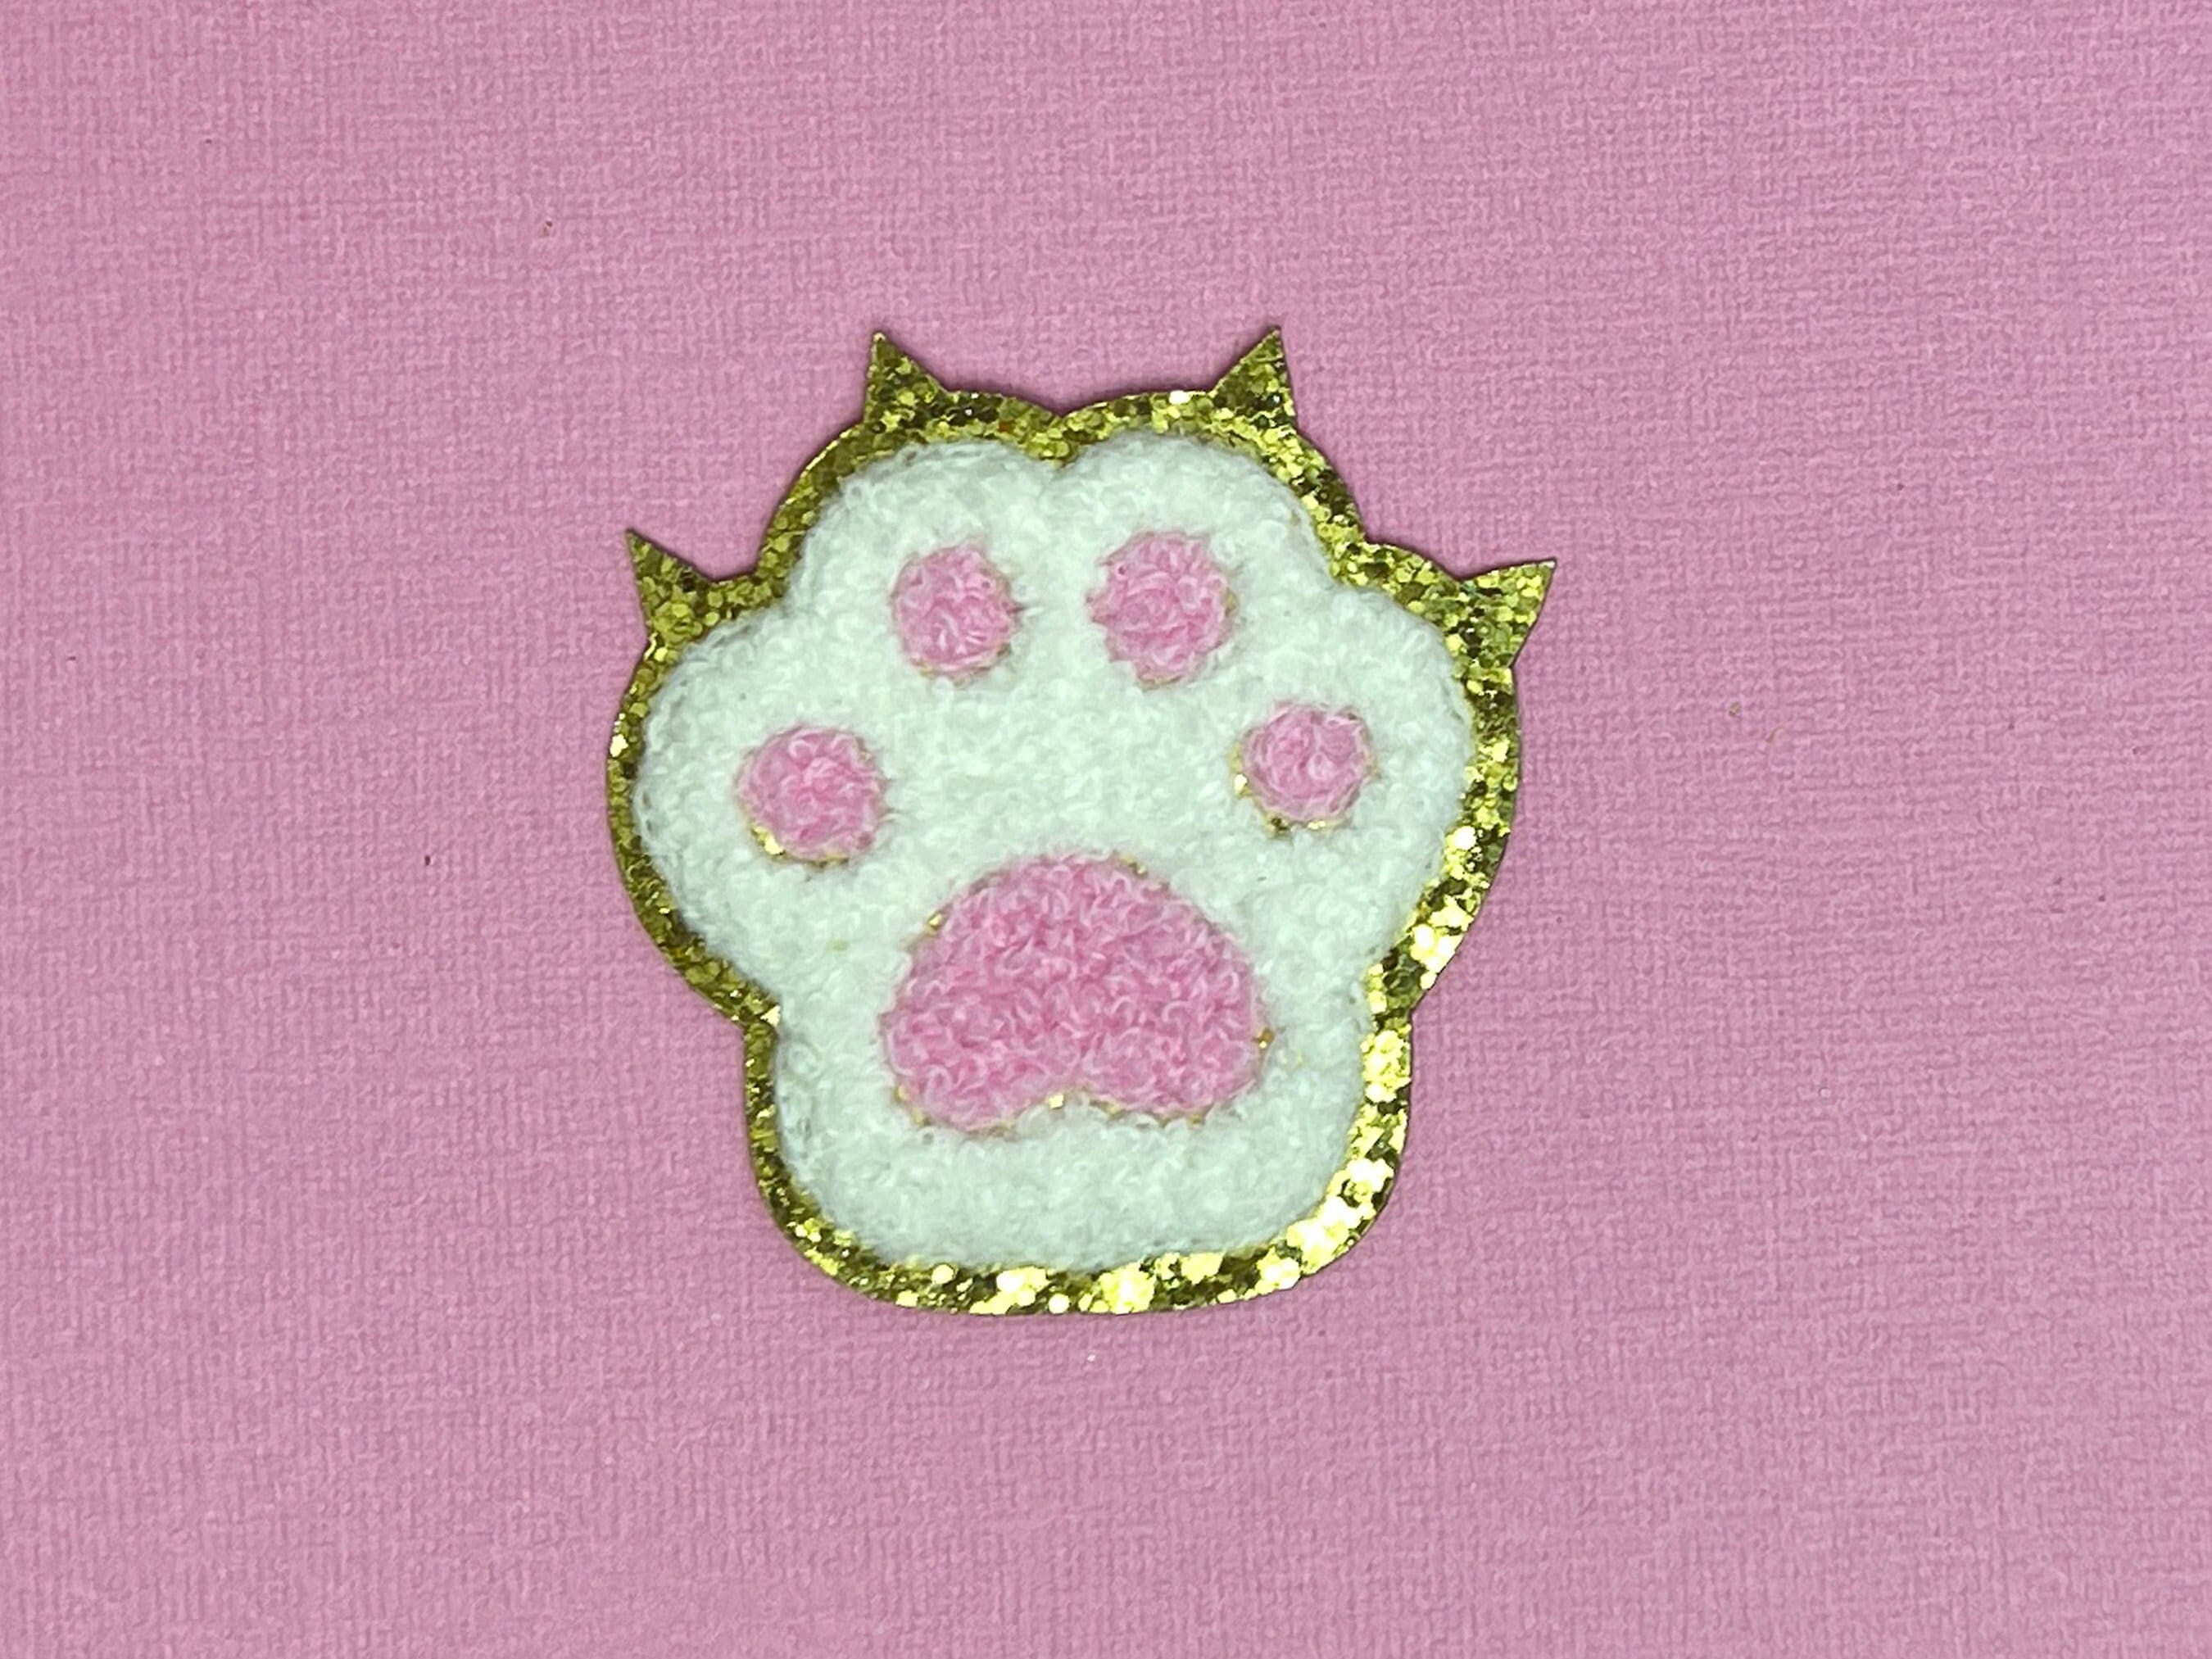 PatchStop Kitty Cat Face Pink Iron On Patches for Clothing Jeans -  3.5x2.75in Small DIY Sew On Patch for Jackets Bags - Embroidered Lady Biker